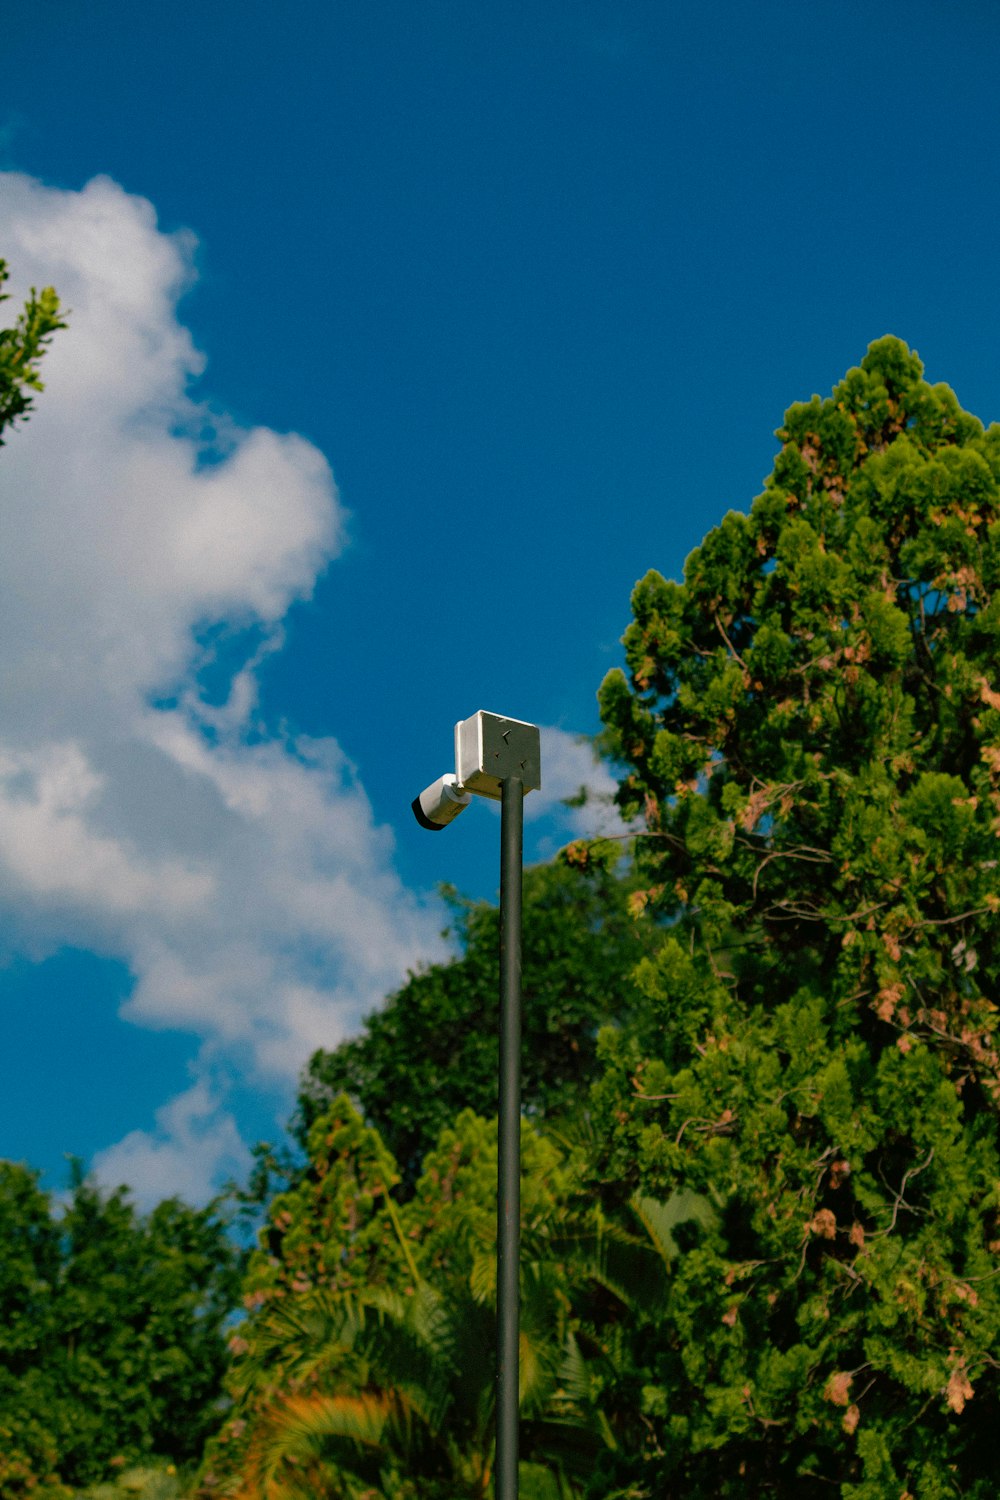 white outdoor CCTV camera mounted on pole near trees during daytime